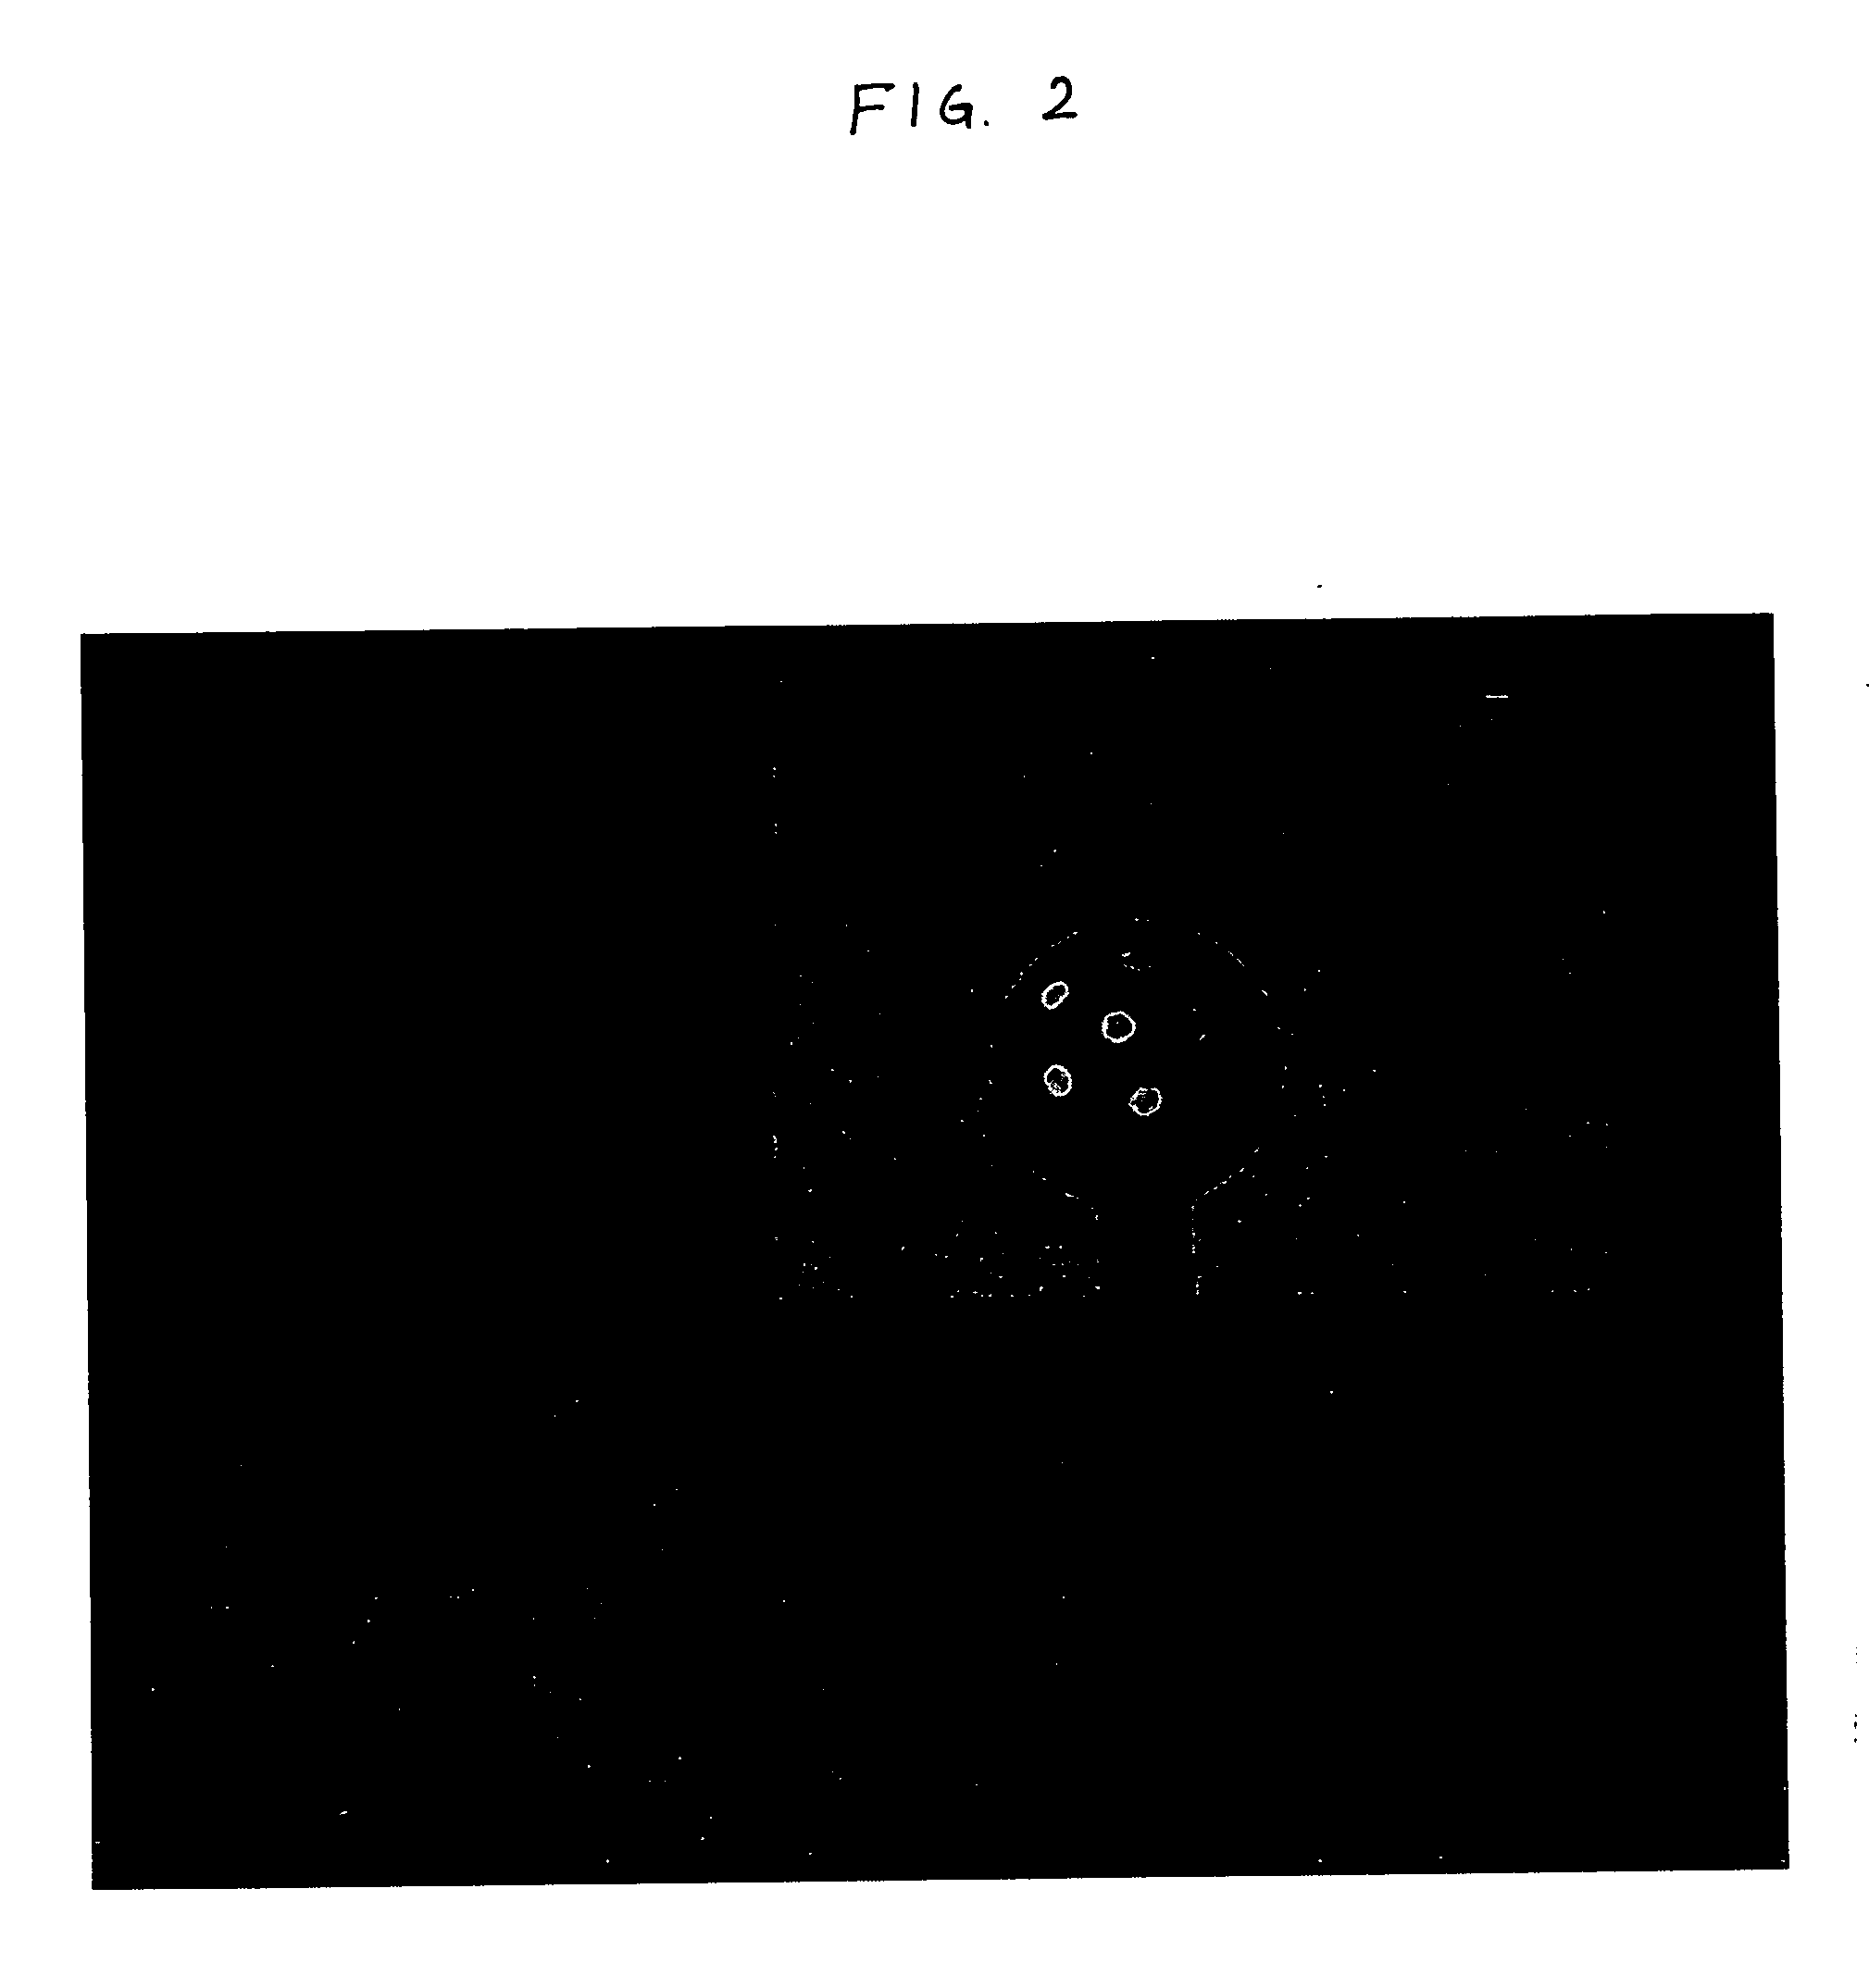 Method and apparatus for measuring ball launch conditions